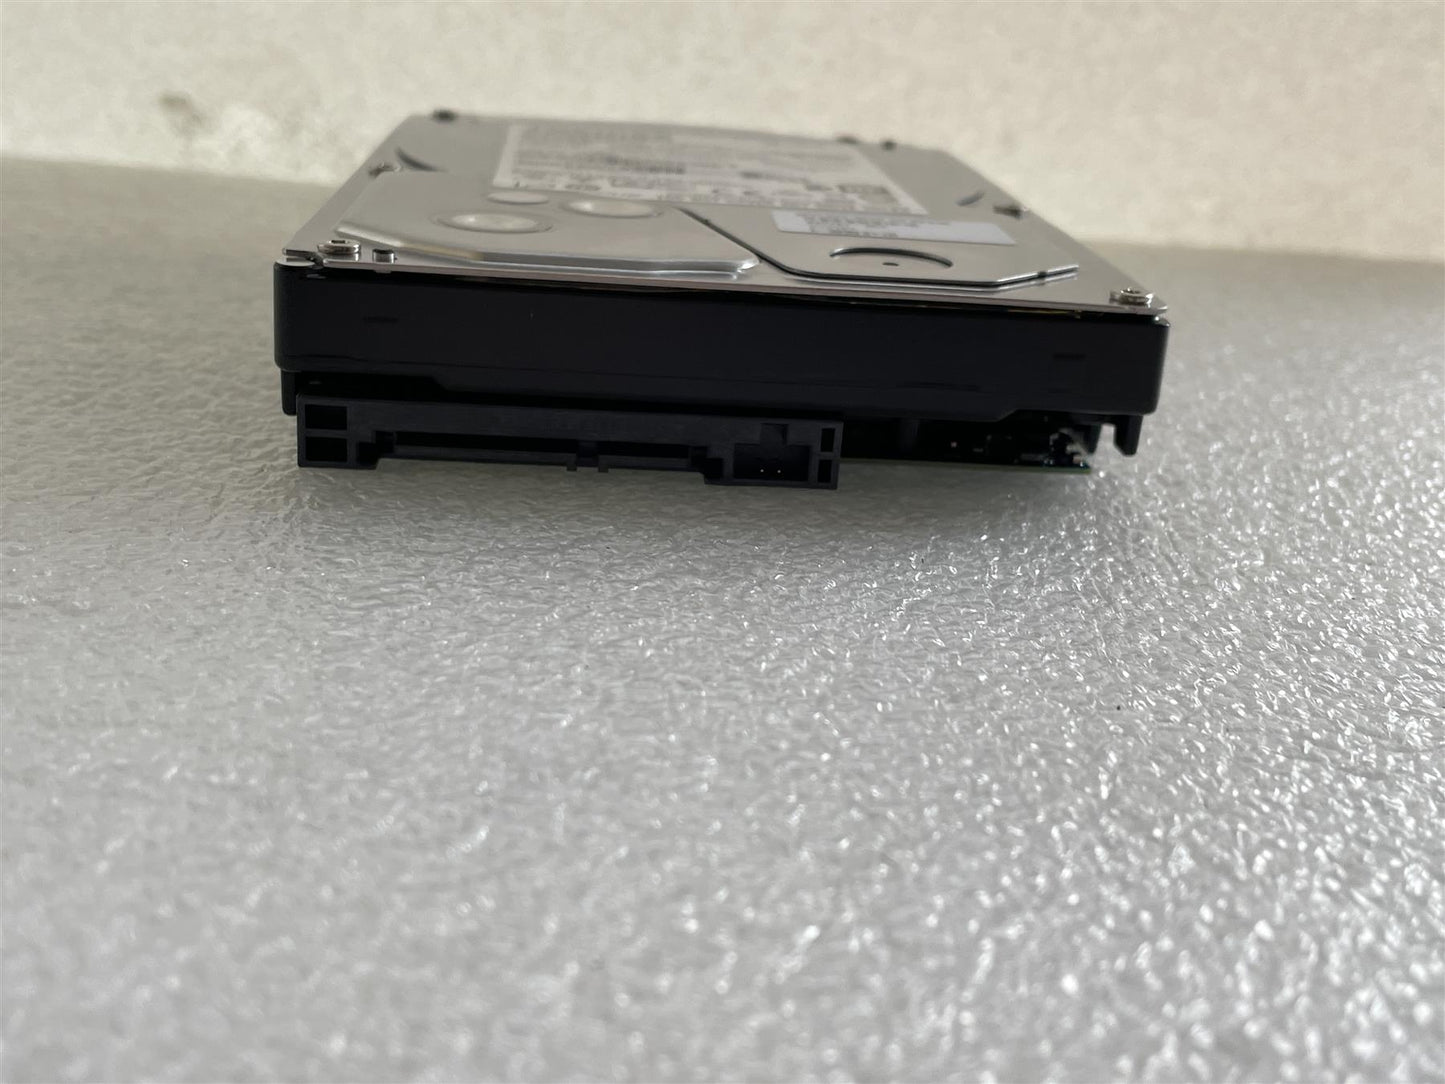 A102 - For HP 932487-853 Toshiba DT01ACA200 2.0TB 2TB 7200RPM HDD Hard Disk Drive 3.5